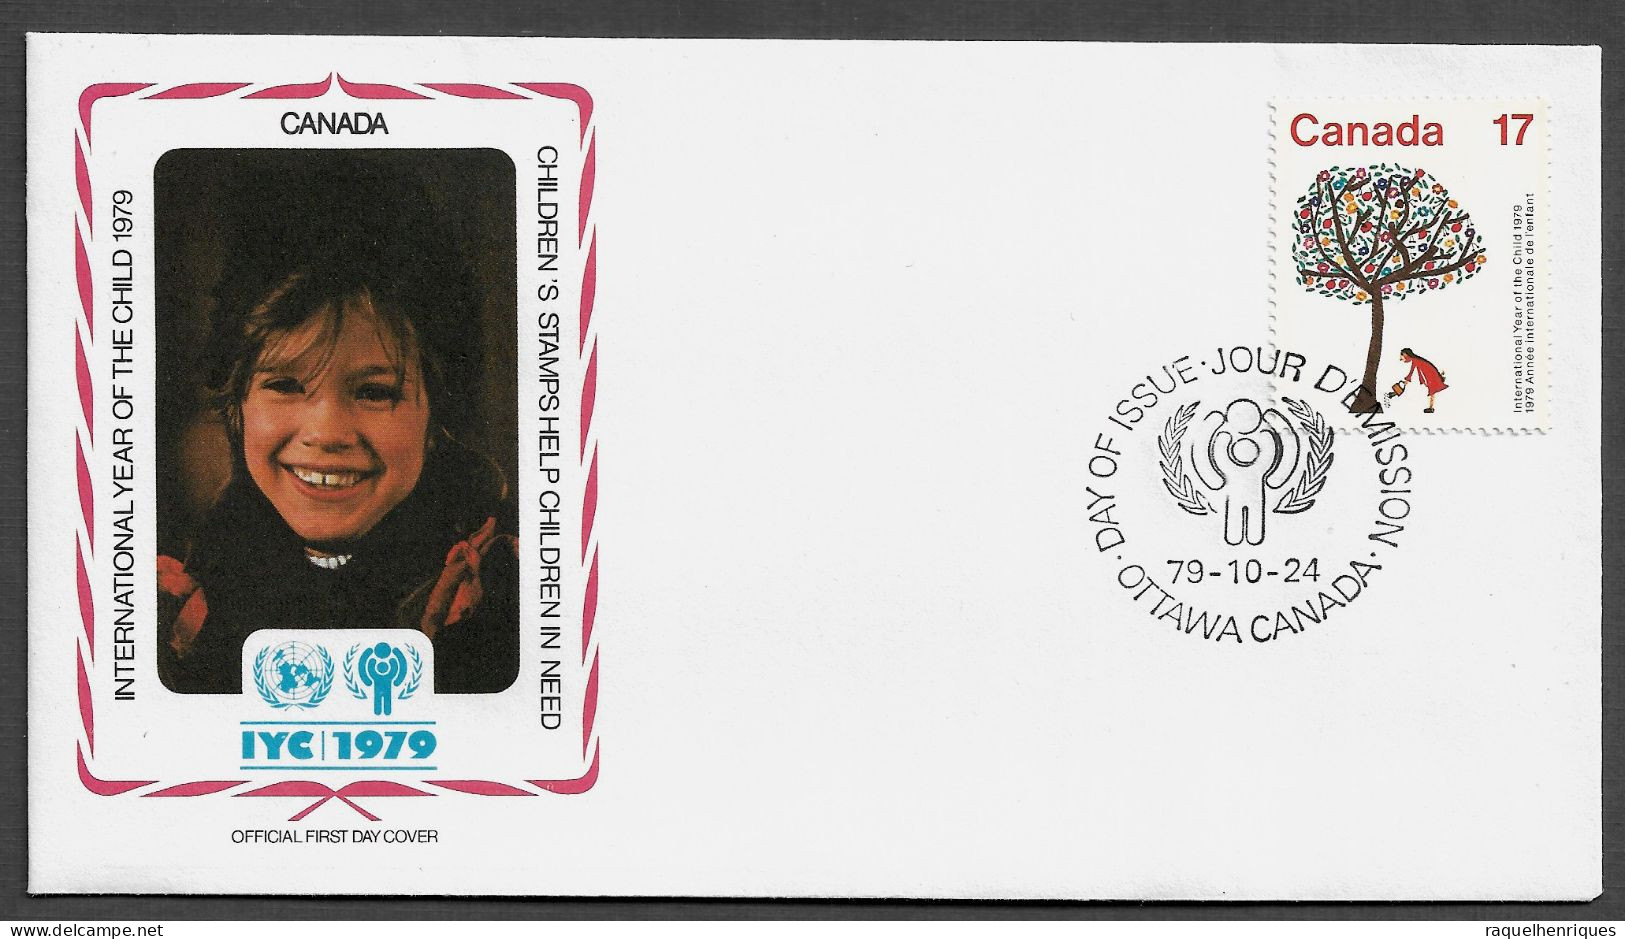 CANADA FDC COVER - 1979 International Year Of The Child SET FDC (FDC79#07) - Covers & Documents